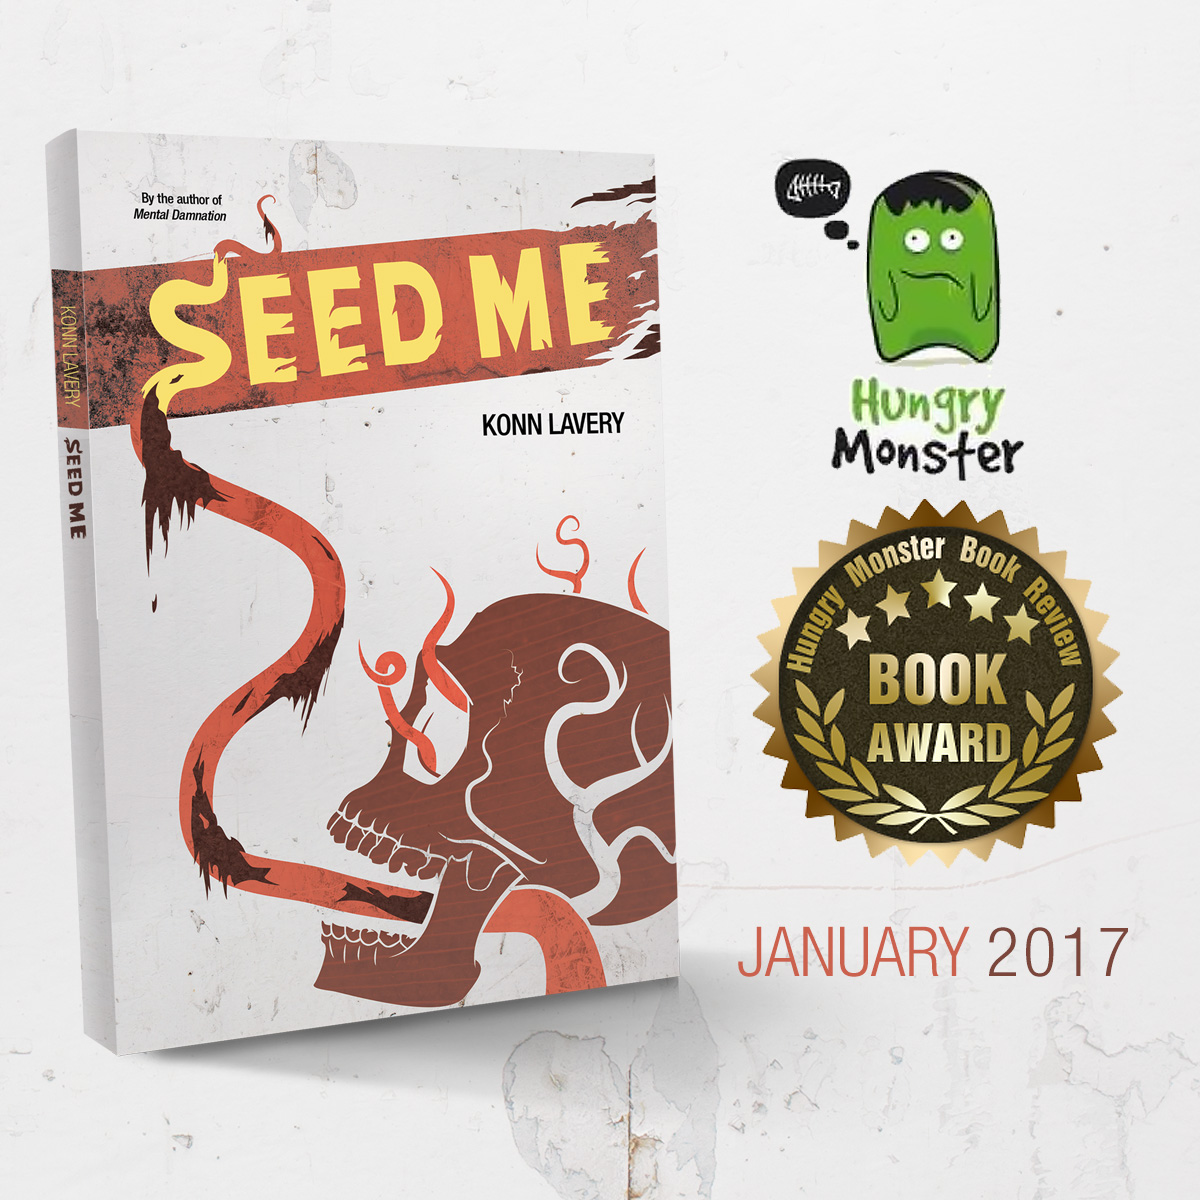 Golden Award by The Hungry Monster Book Review